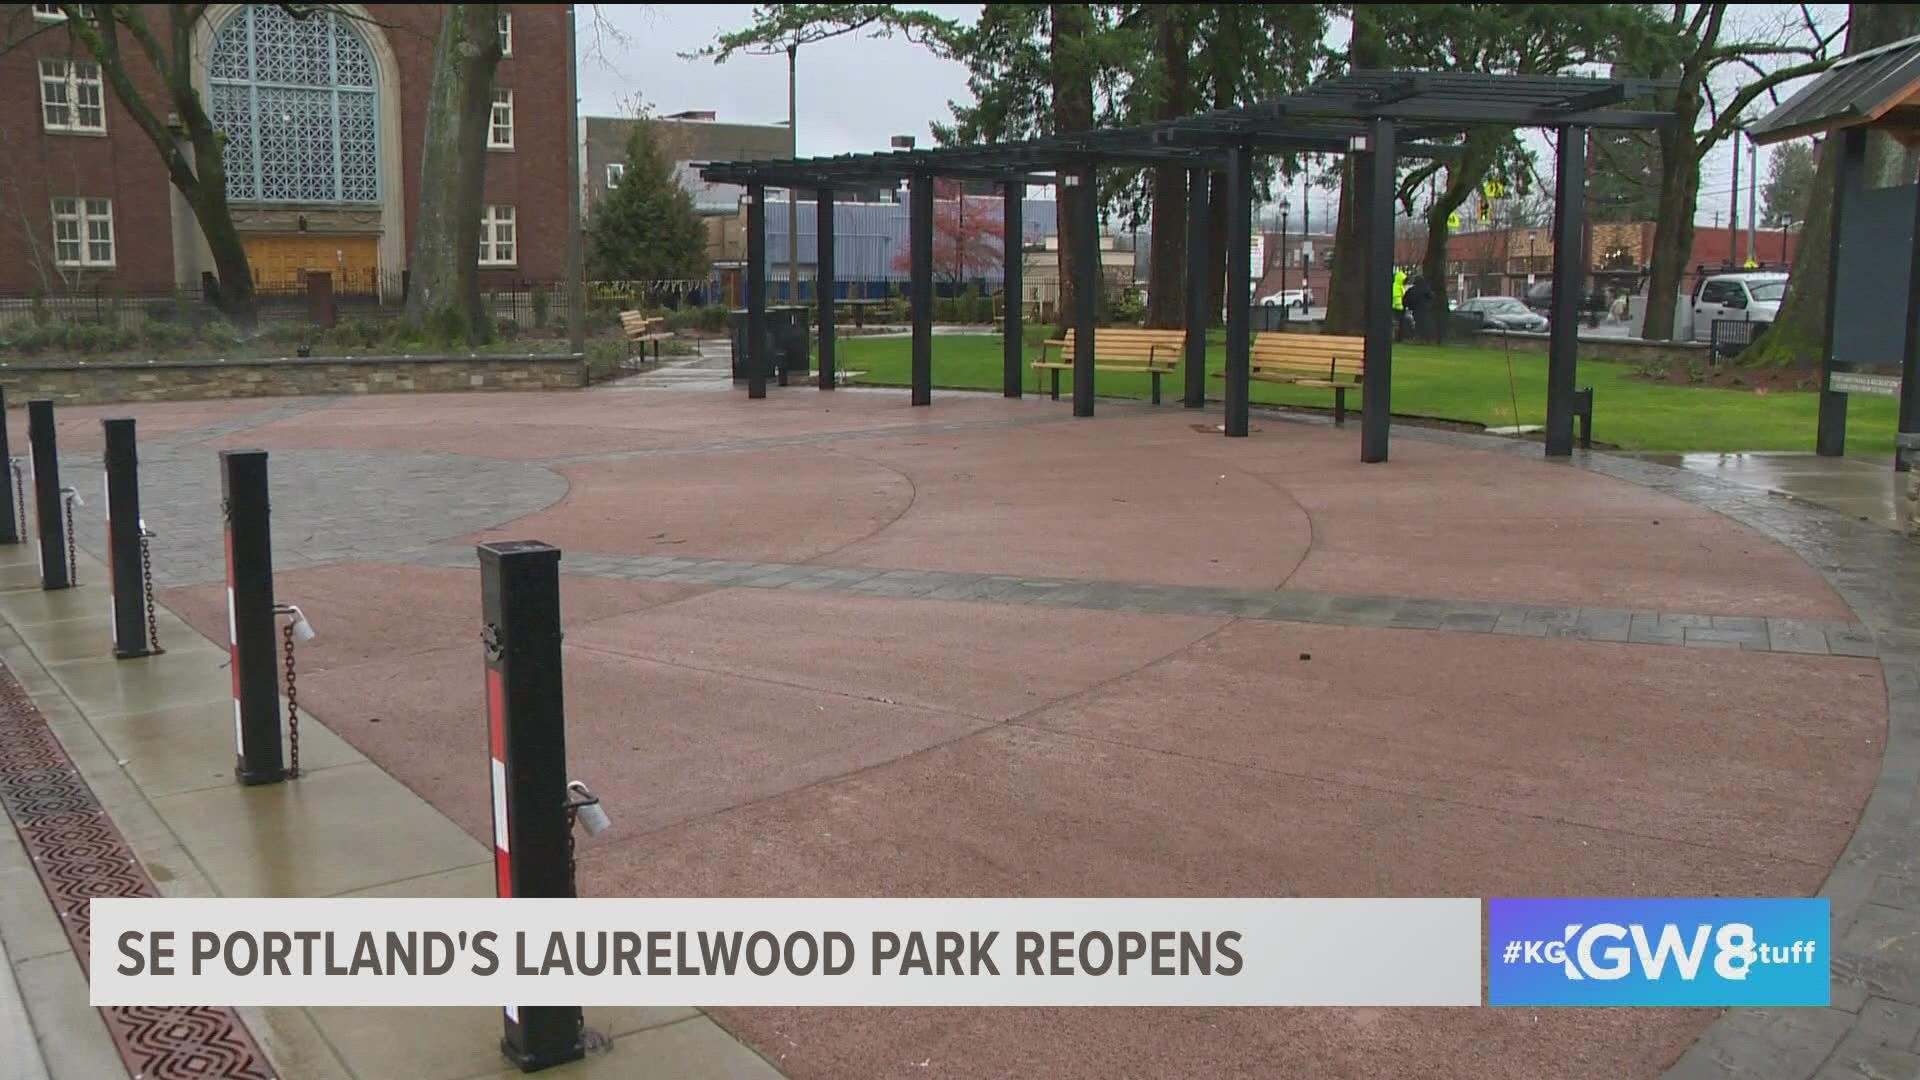 It has been in the works since 2013, when the Laurelwood Park community chose the design, centered around a new plaza, plantings and landscaping.